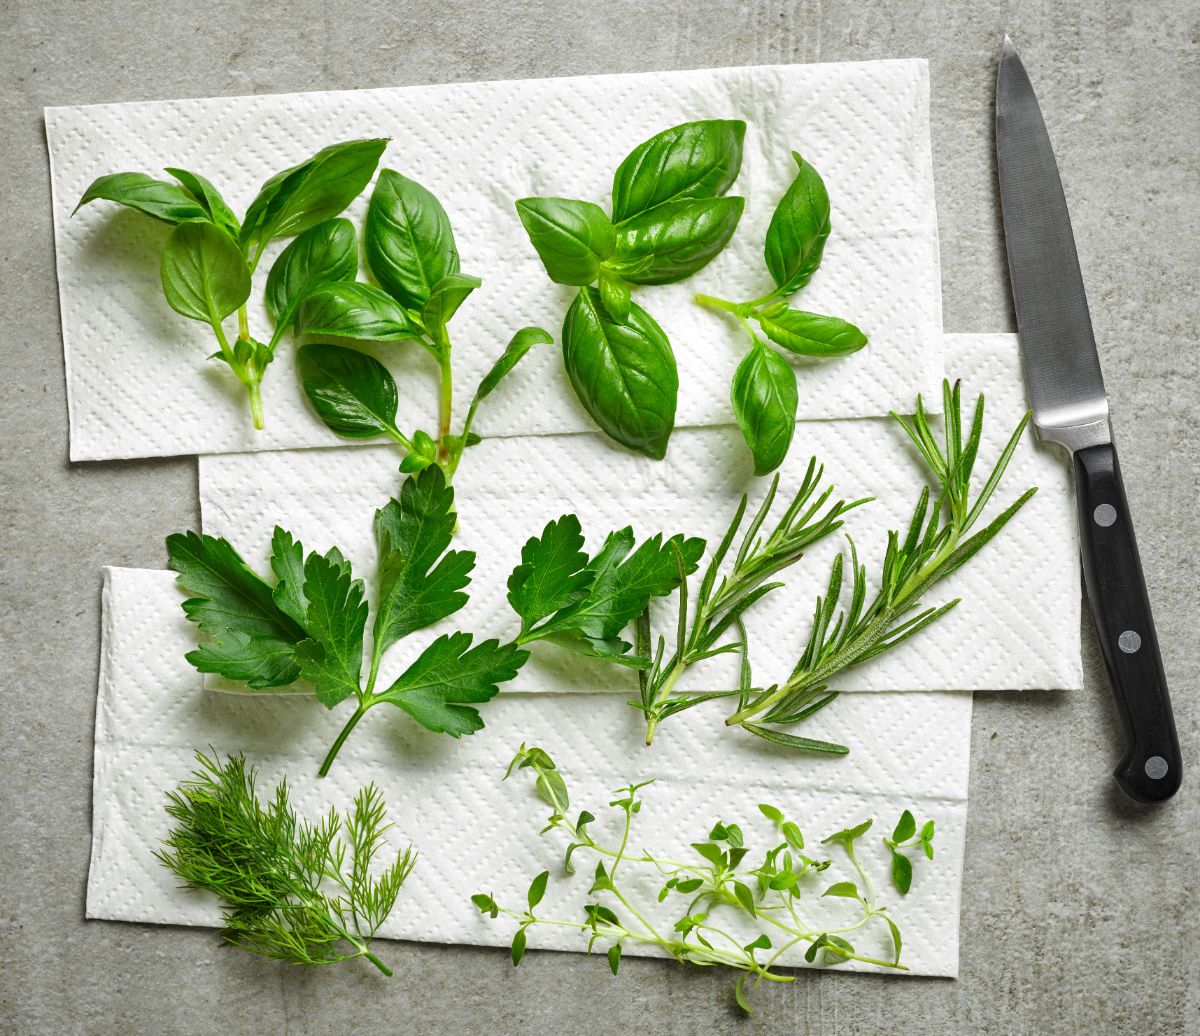 Herbs drying on a paper towel in the microwave